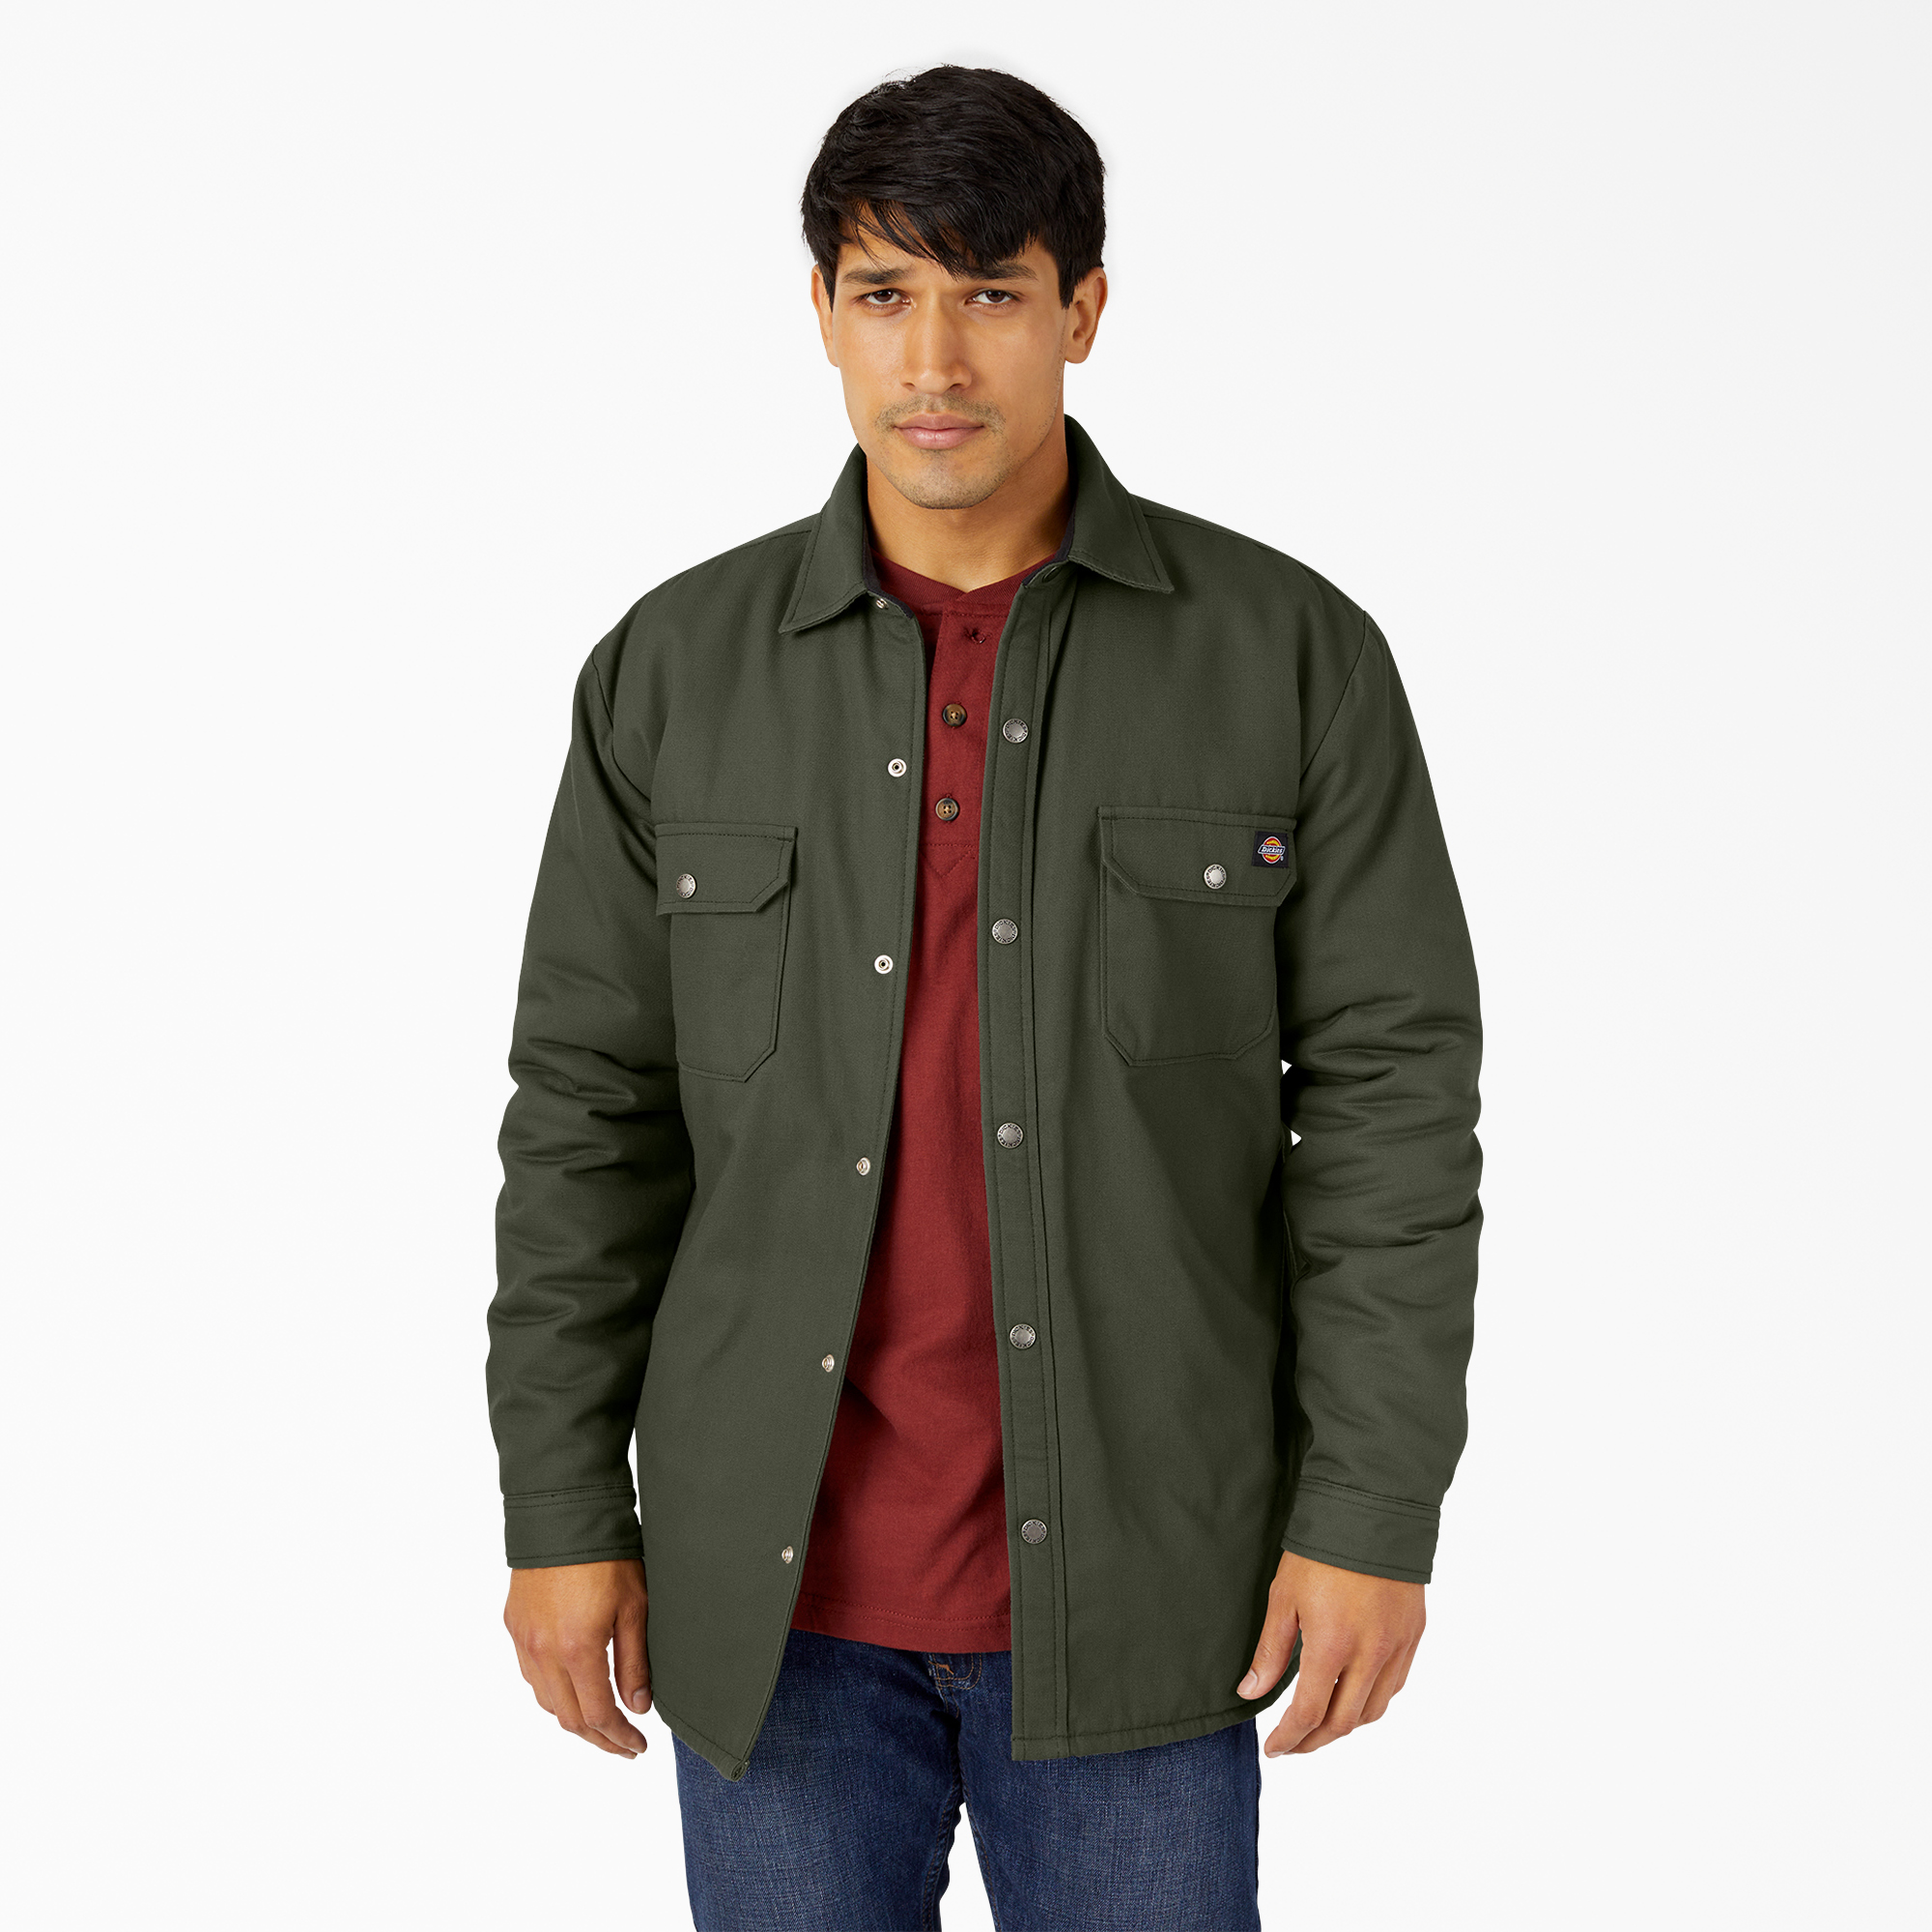 Flannel Lined Duck Shirt Jacket with Hydroshield - Olive Green (OG)